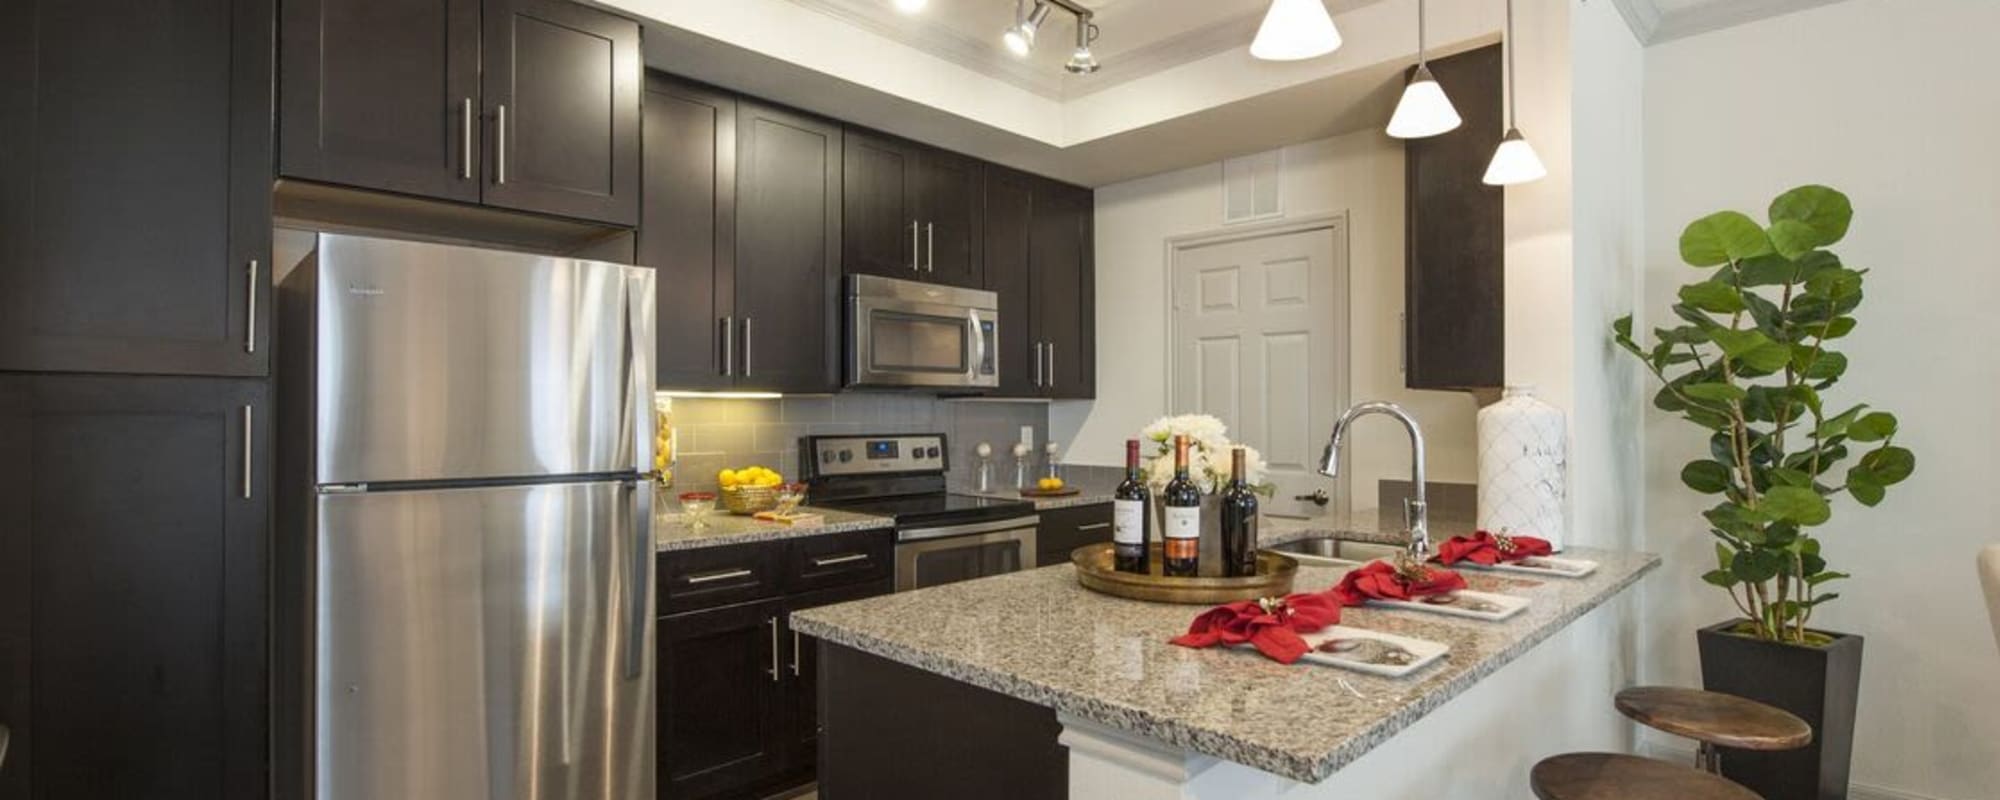 Upscale apartment kitchen with dark wood cabinets at The Crossing at Katy Ranch in Katy, Texas